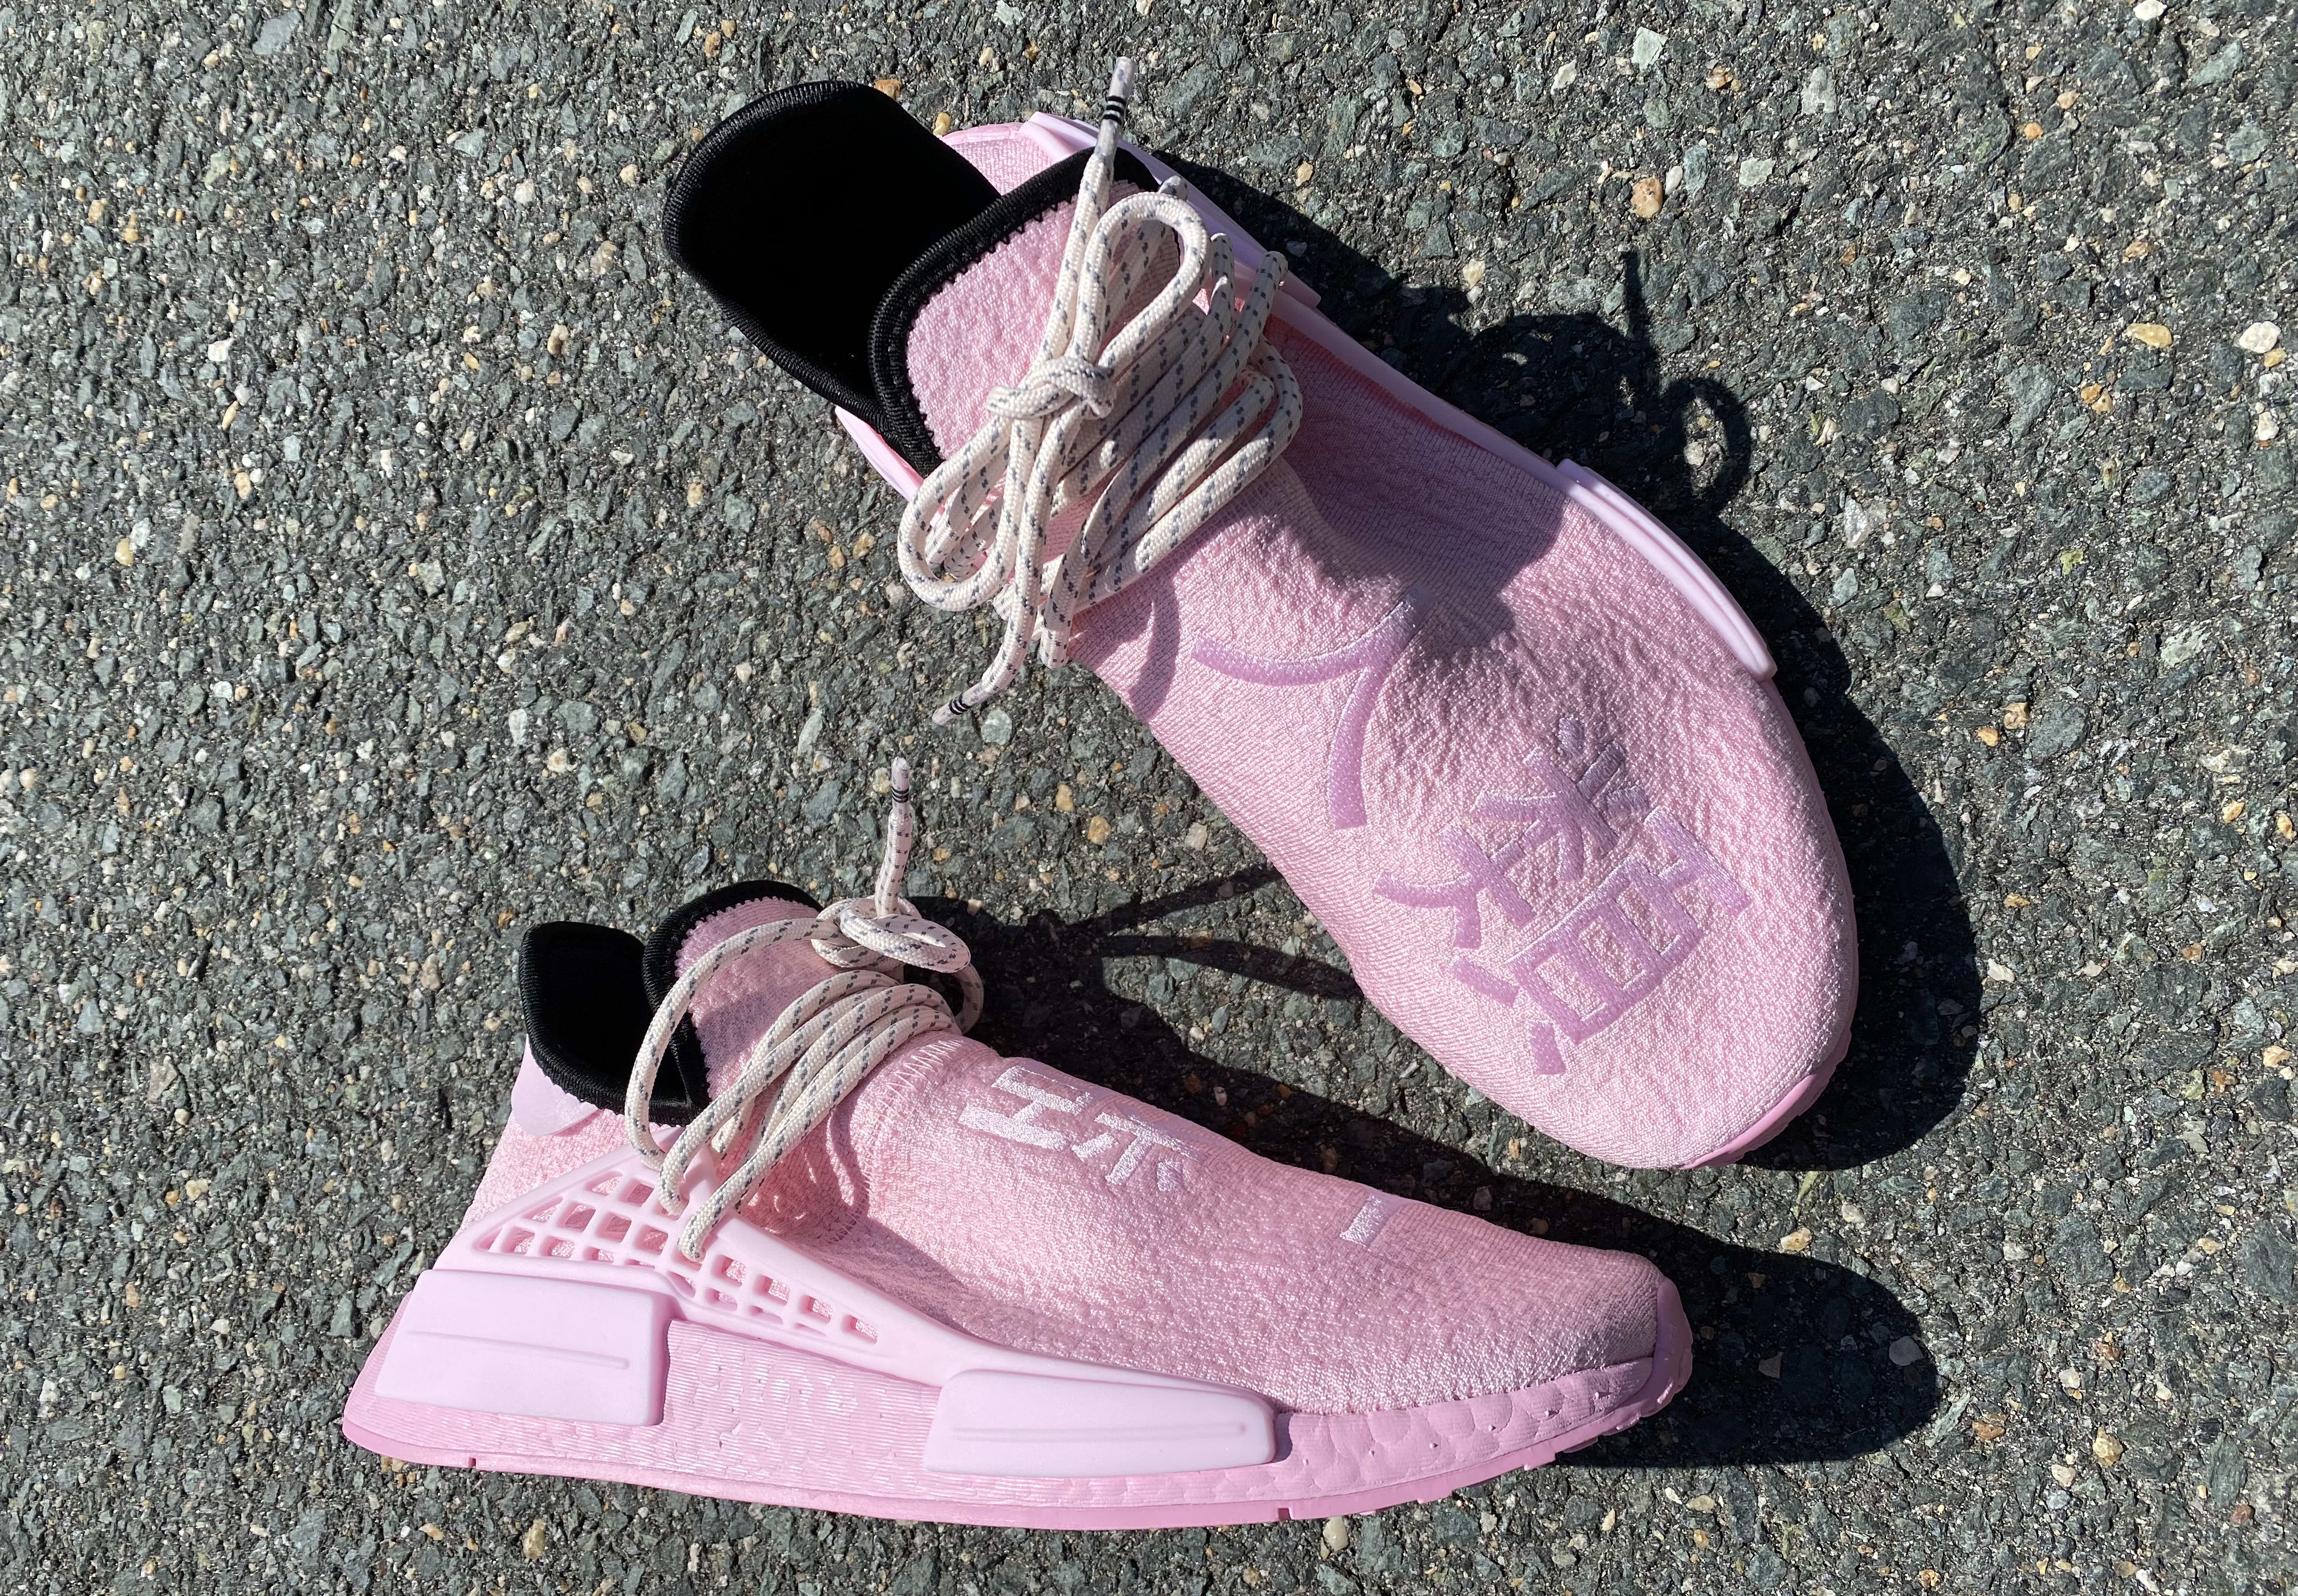 Pharrell Adidas Nmd Hu Pink Release Date Gy00 March 21 Sole Collector